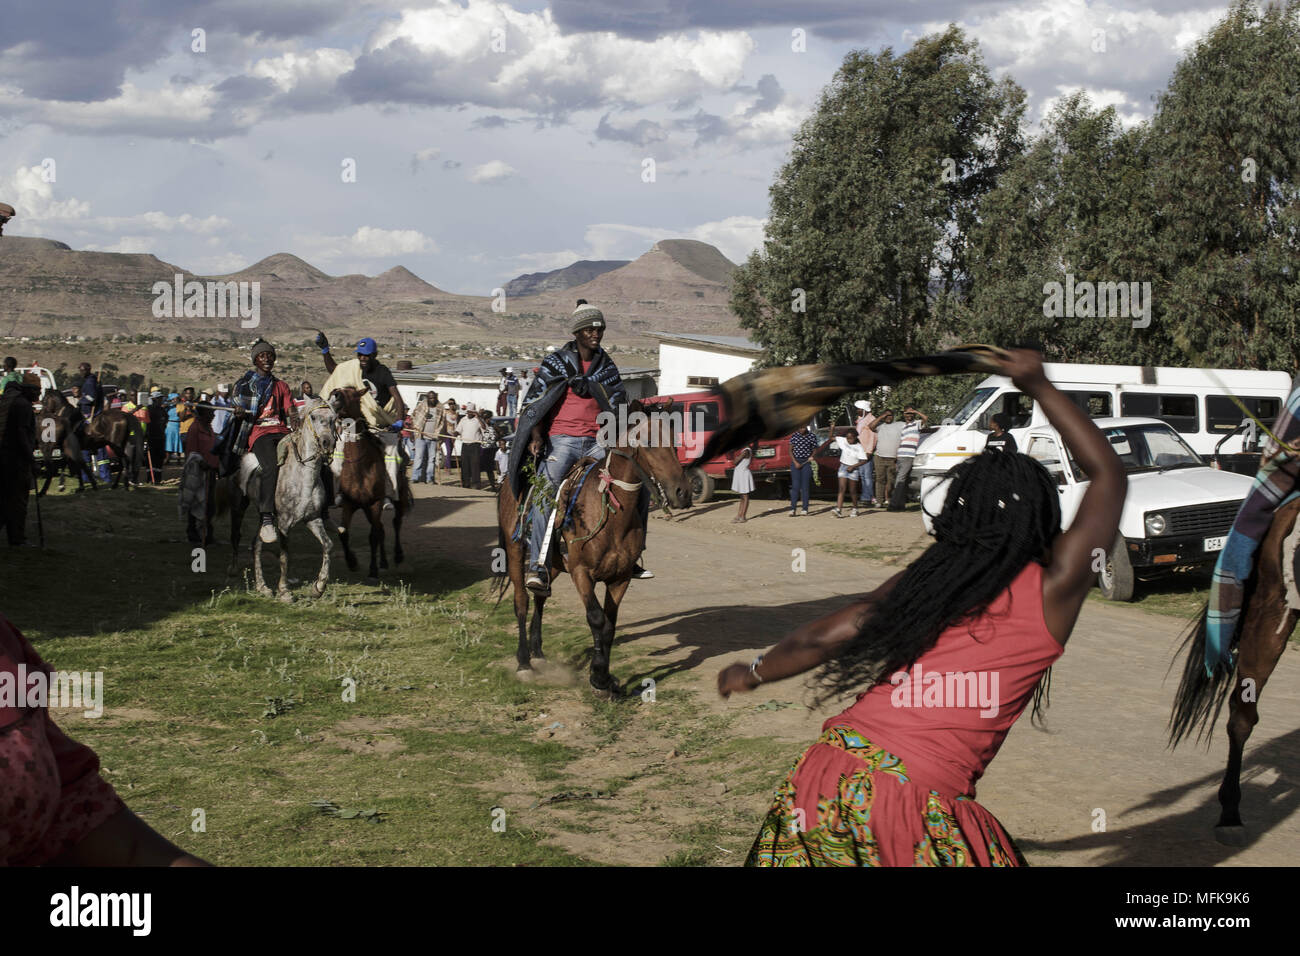 December 29, 2017 - Matatiele, Eastern Cape, South Africa - Xhosa people wait for the initiates to return from the mountains. Women and horse riders hit each other with sticks and textiles. (Credit Image: © Stefan Kleinowitz via ZUMA Wire) Stock Photo